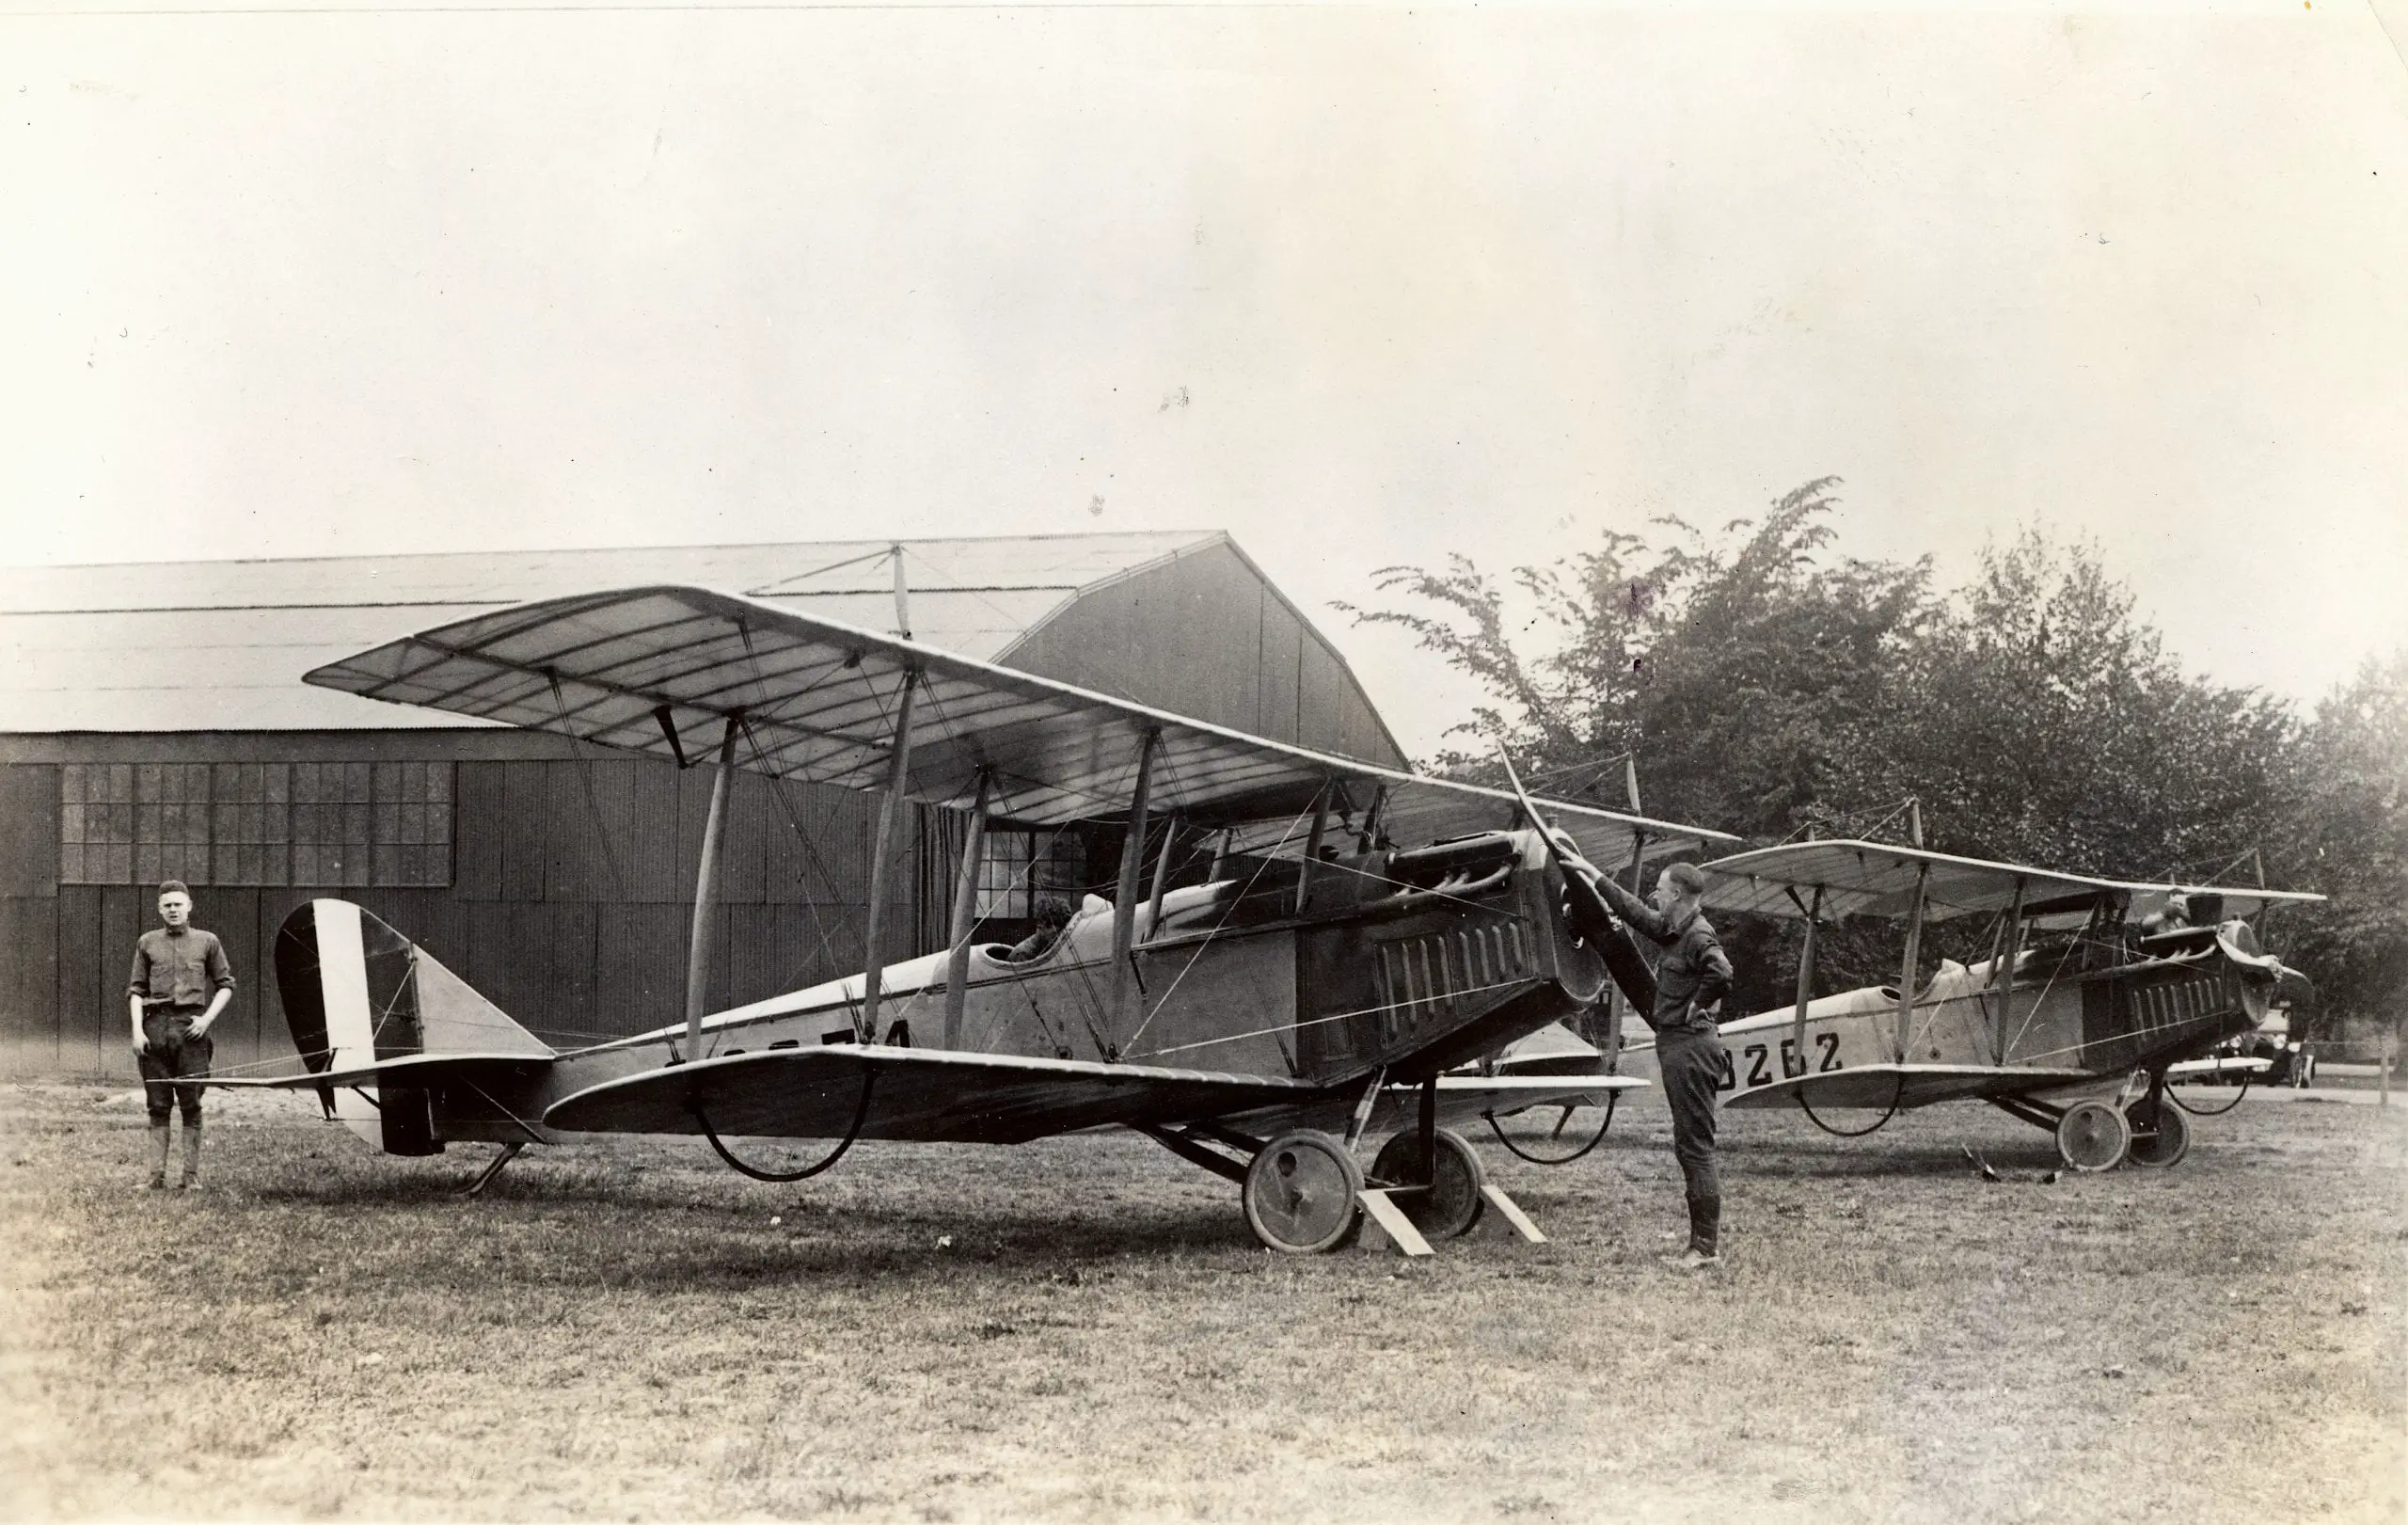 Two Curtiss JN-4H "Jenny" airmail planes parked at the temporary airmail field at Washington, DC’s Polo Field, a small strip of grassy land between the Tidal Basin and Potomac River.